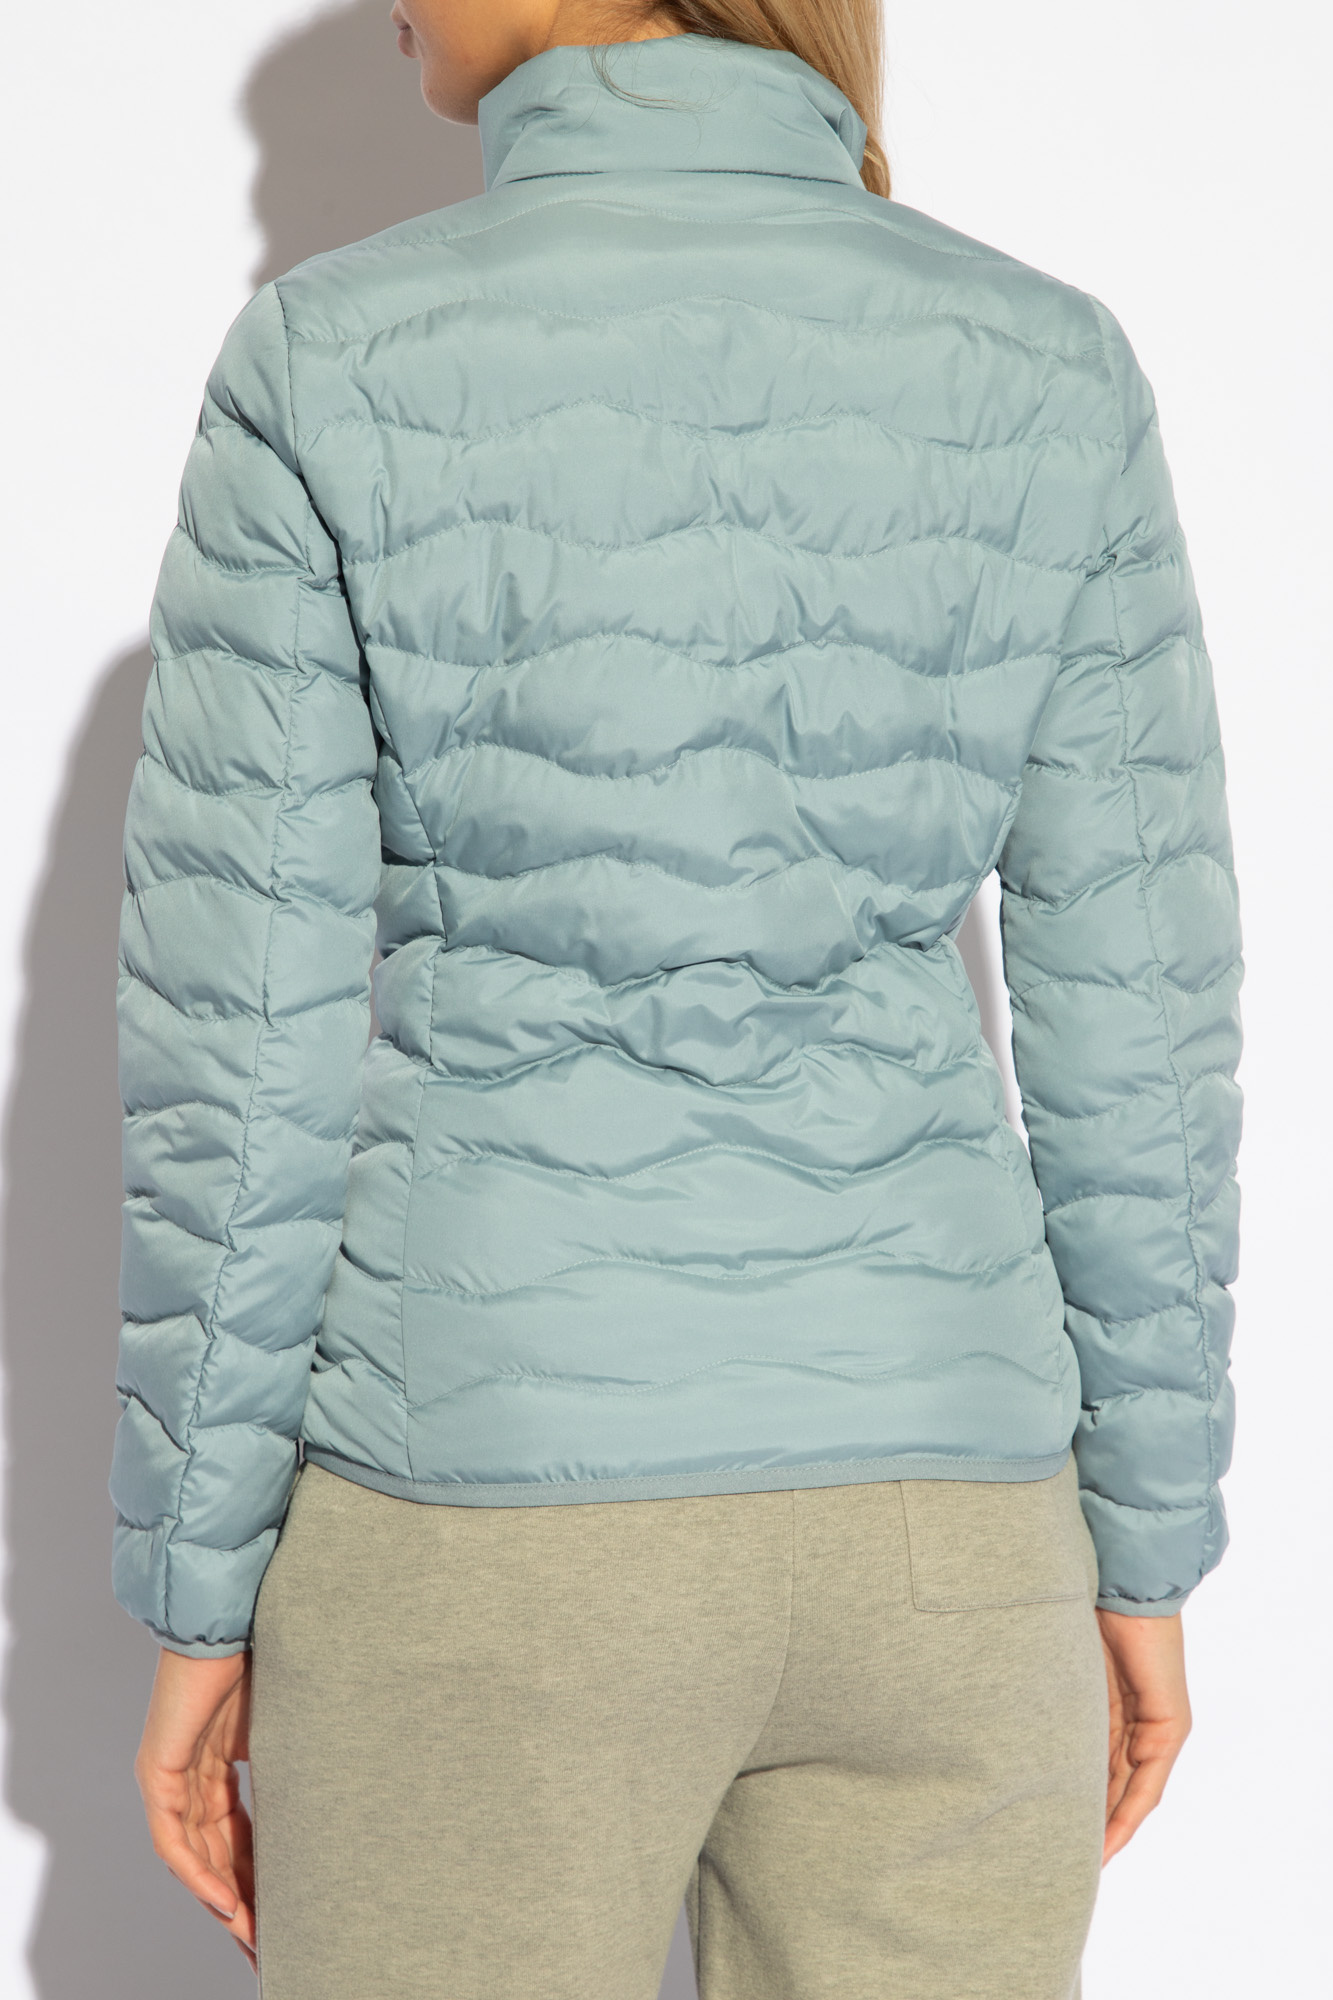 EA7 Emporio stamp armani Quilted jacket